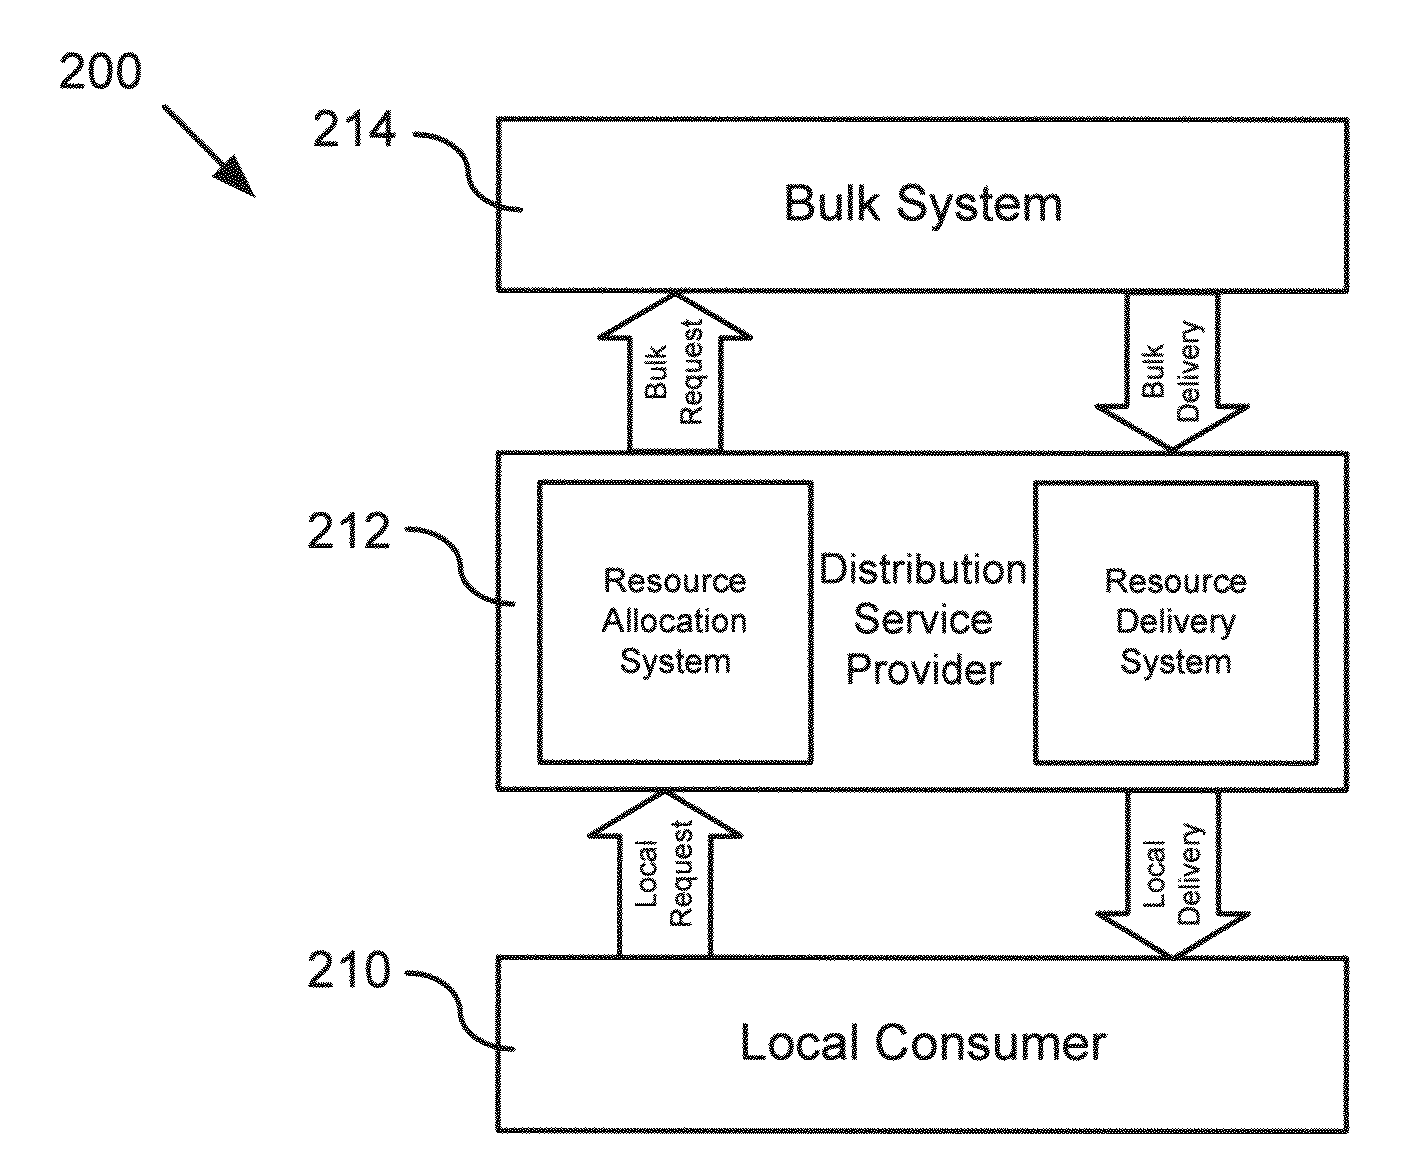 Using one-way communications in a market-based resource allocation system